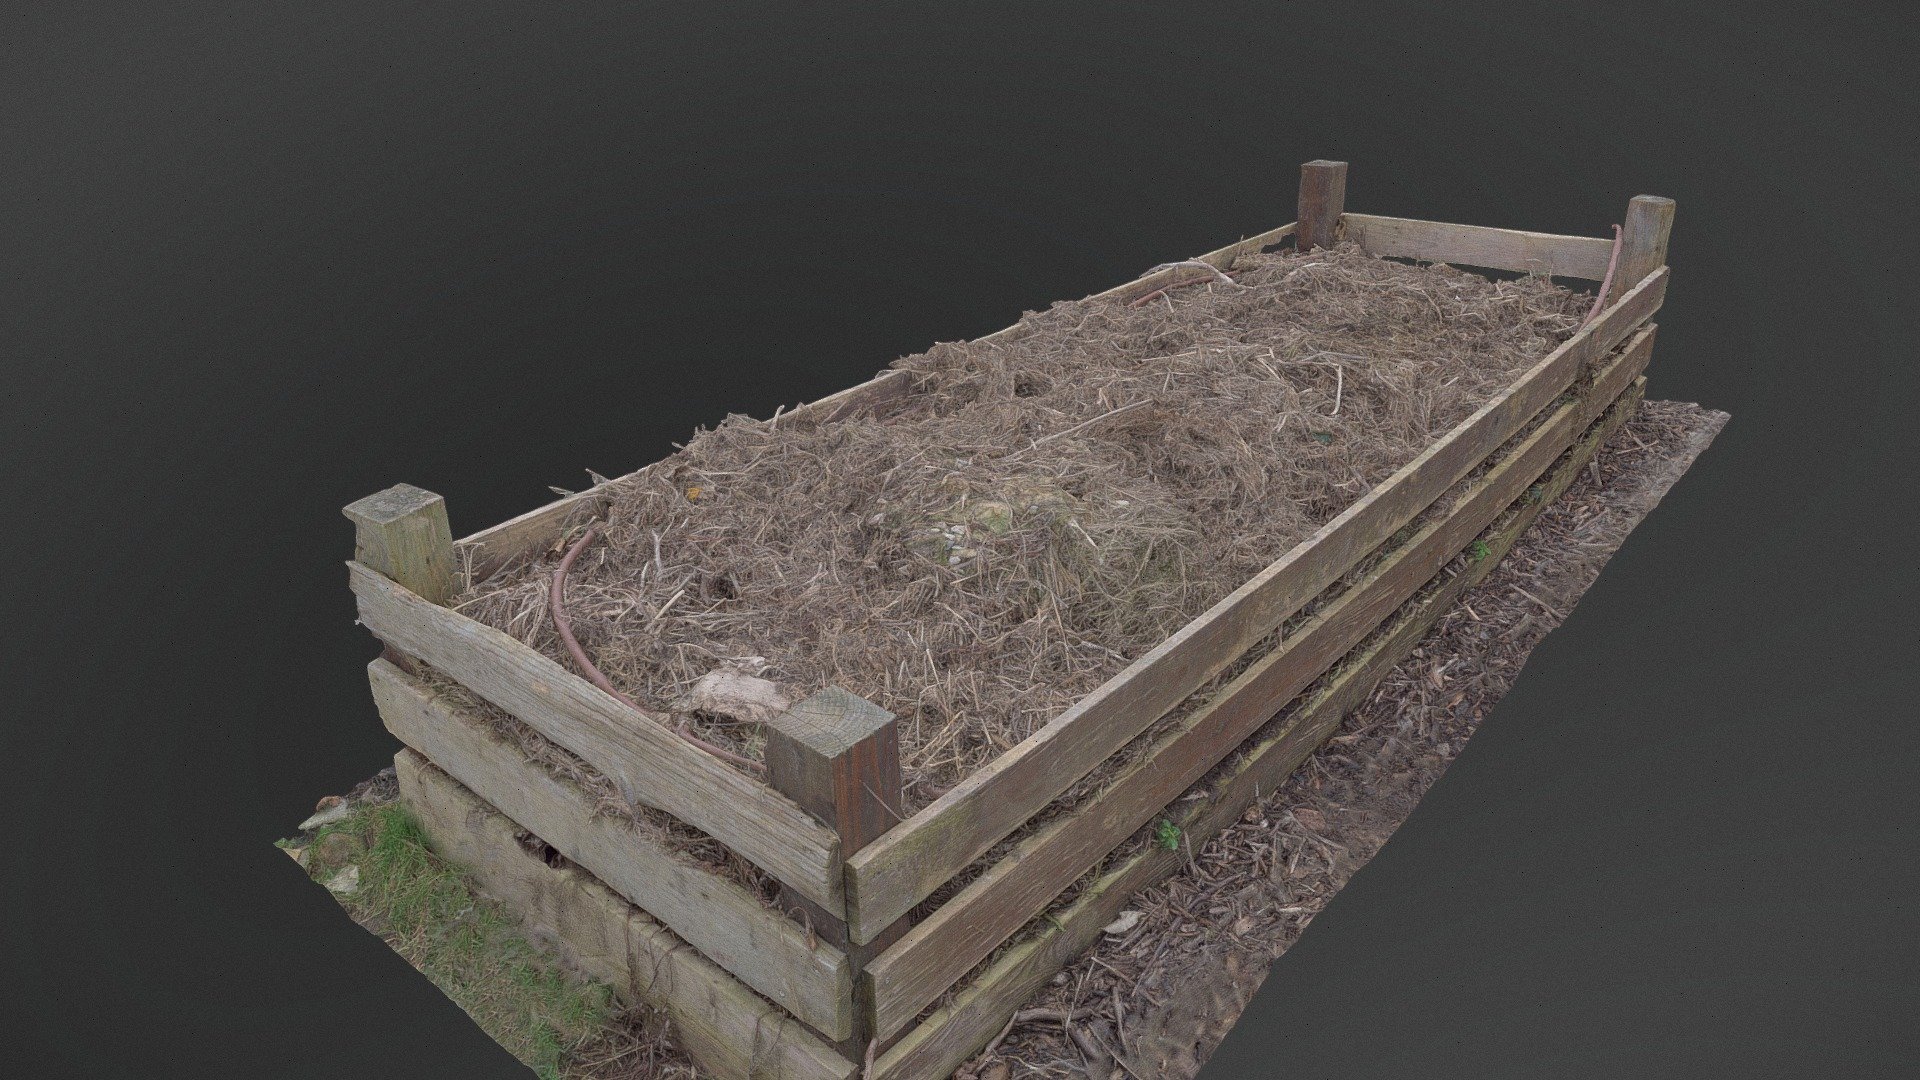 Organic natural Raised  hay filled dry grass planting growing flower bed soil and manure fertilizer, natural farming gardening production

photogrammetry scan (180x36mp), 4x8k textures + hd normals (as additional .zip download) - Raised hay filled planting bed - Buy Royalty Free 3D model by matousekfoto 3d model